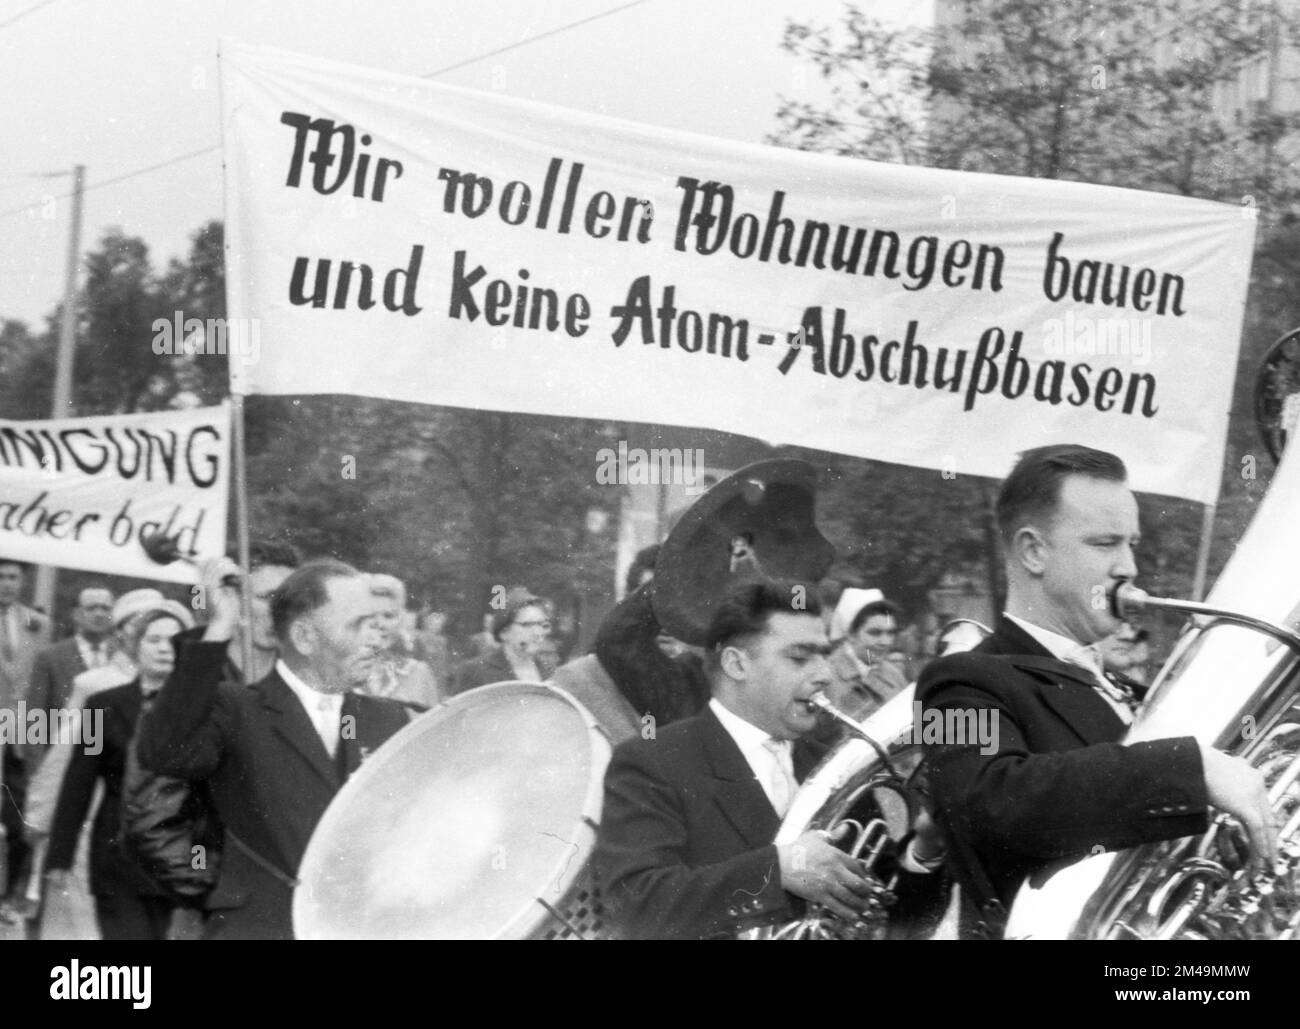 The traditional 1 May 1958 parade of the DGB. here in Hanover, also echoed the demands of the proclaimer of the peace movement Kampf dem Atomtod Stock Photo